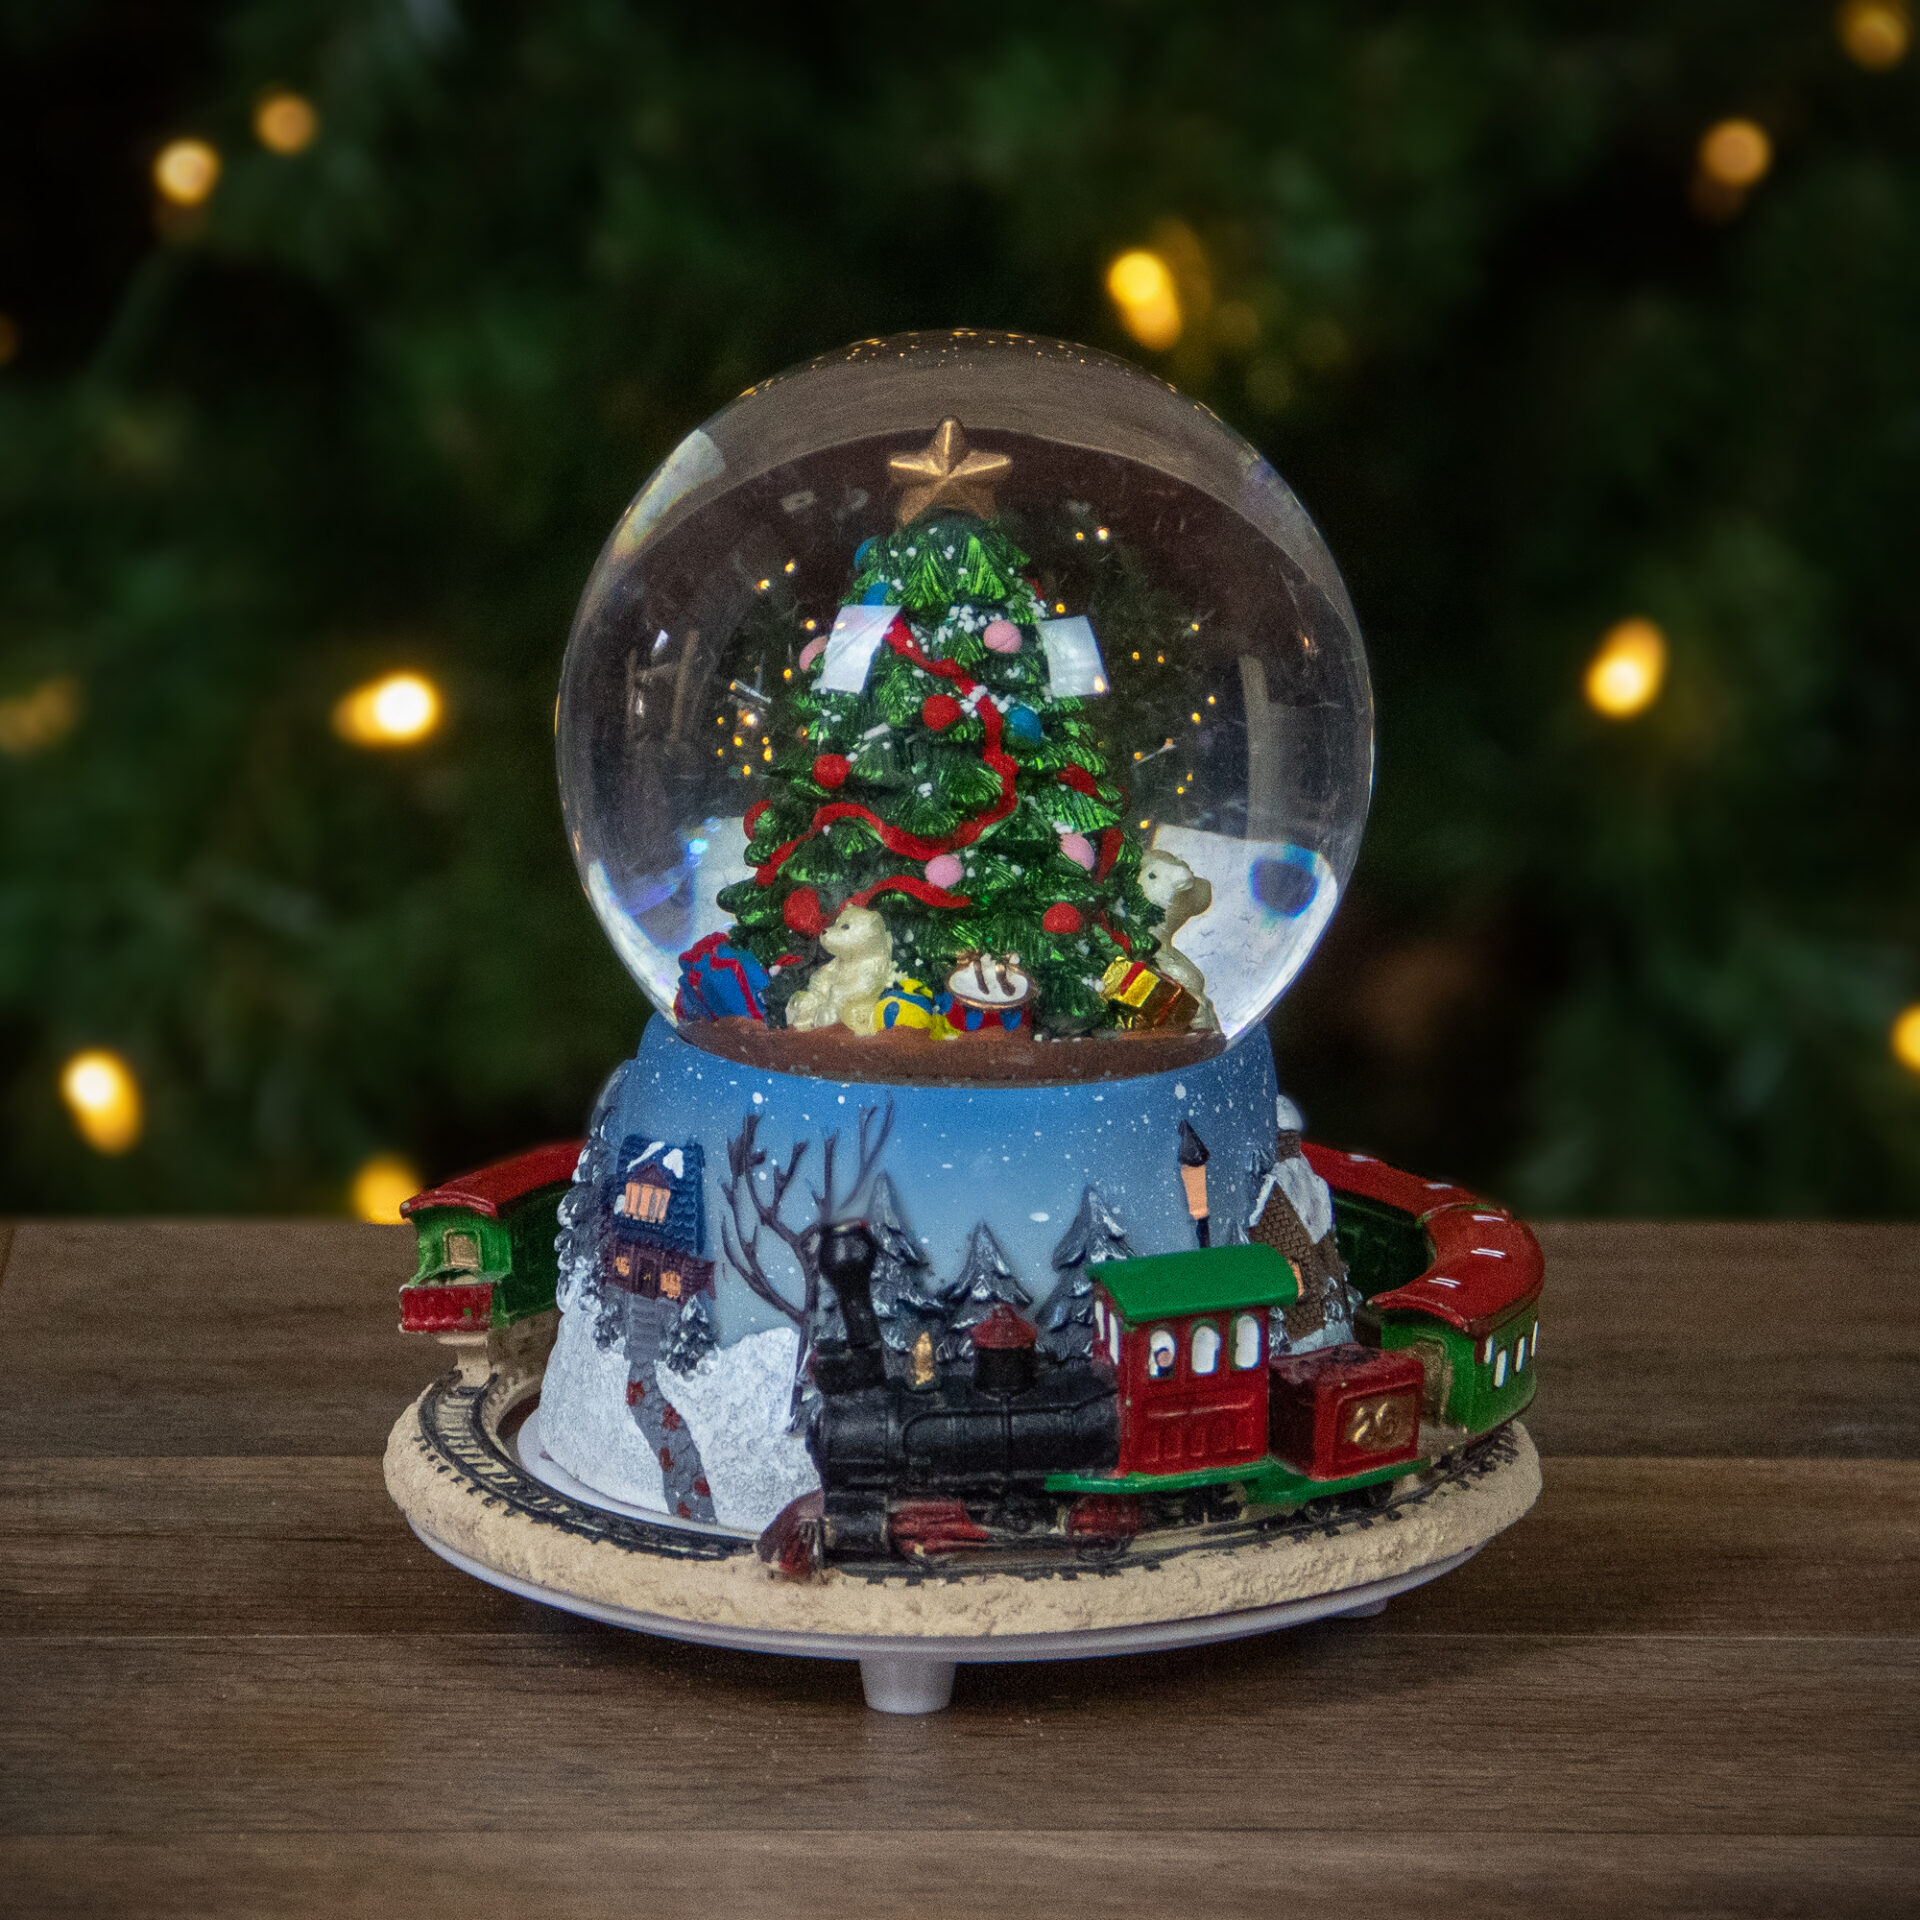 This is perhaps the first thing that comes to people's minds when talking about Christmas ornaments. This traditional globe stands for everything merry and bright about the season. With its snow-covered landscape, this lovely decor piece is sure to bring out the festive spirit in anyone who takes a look at it.